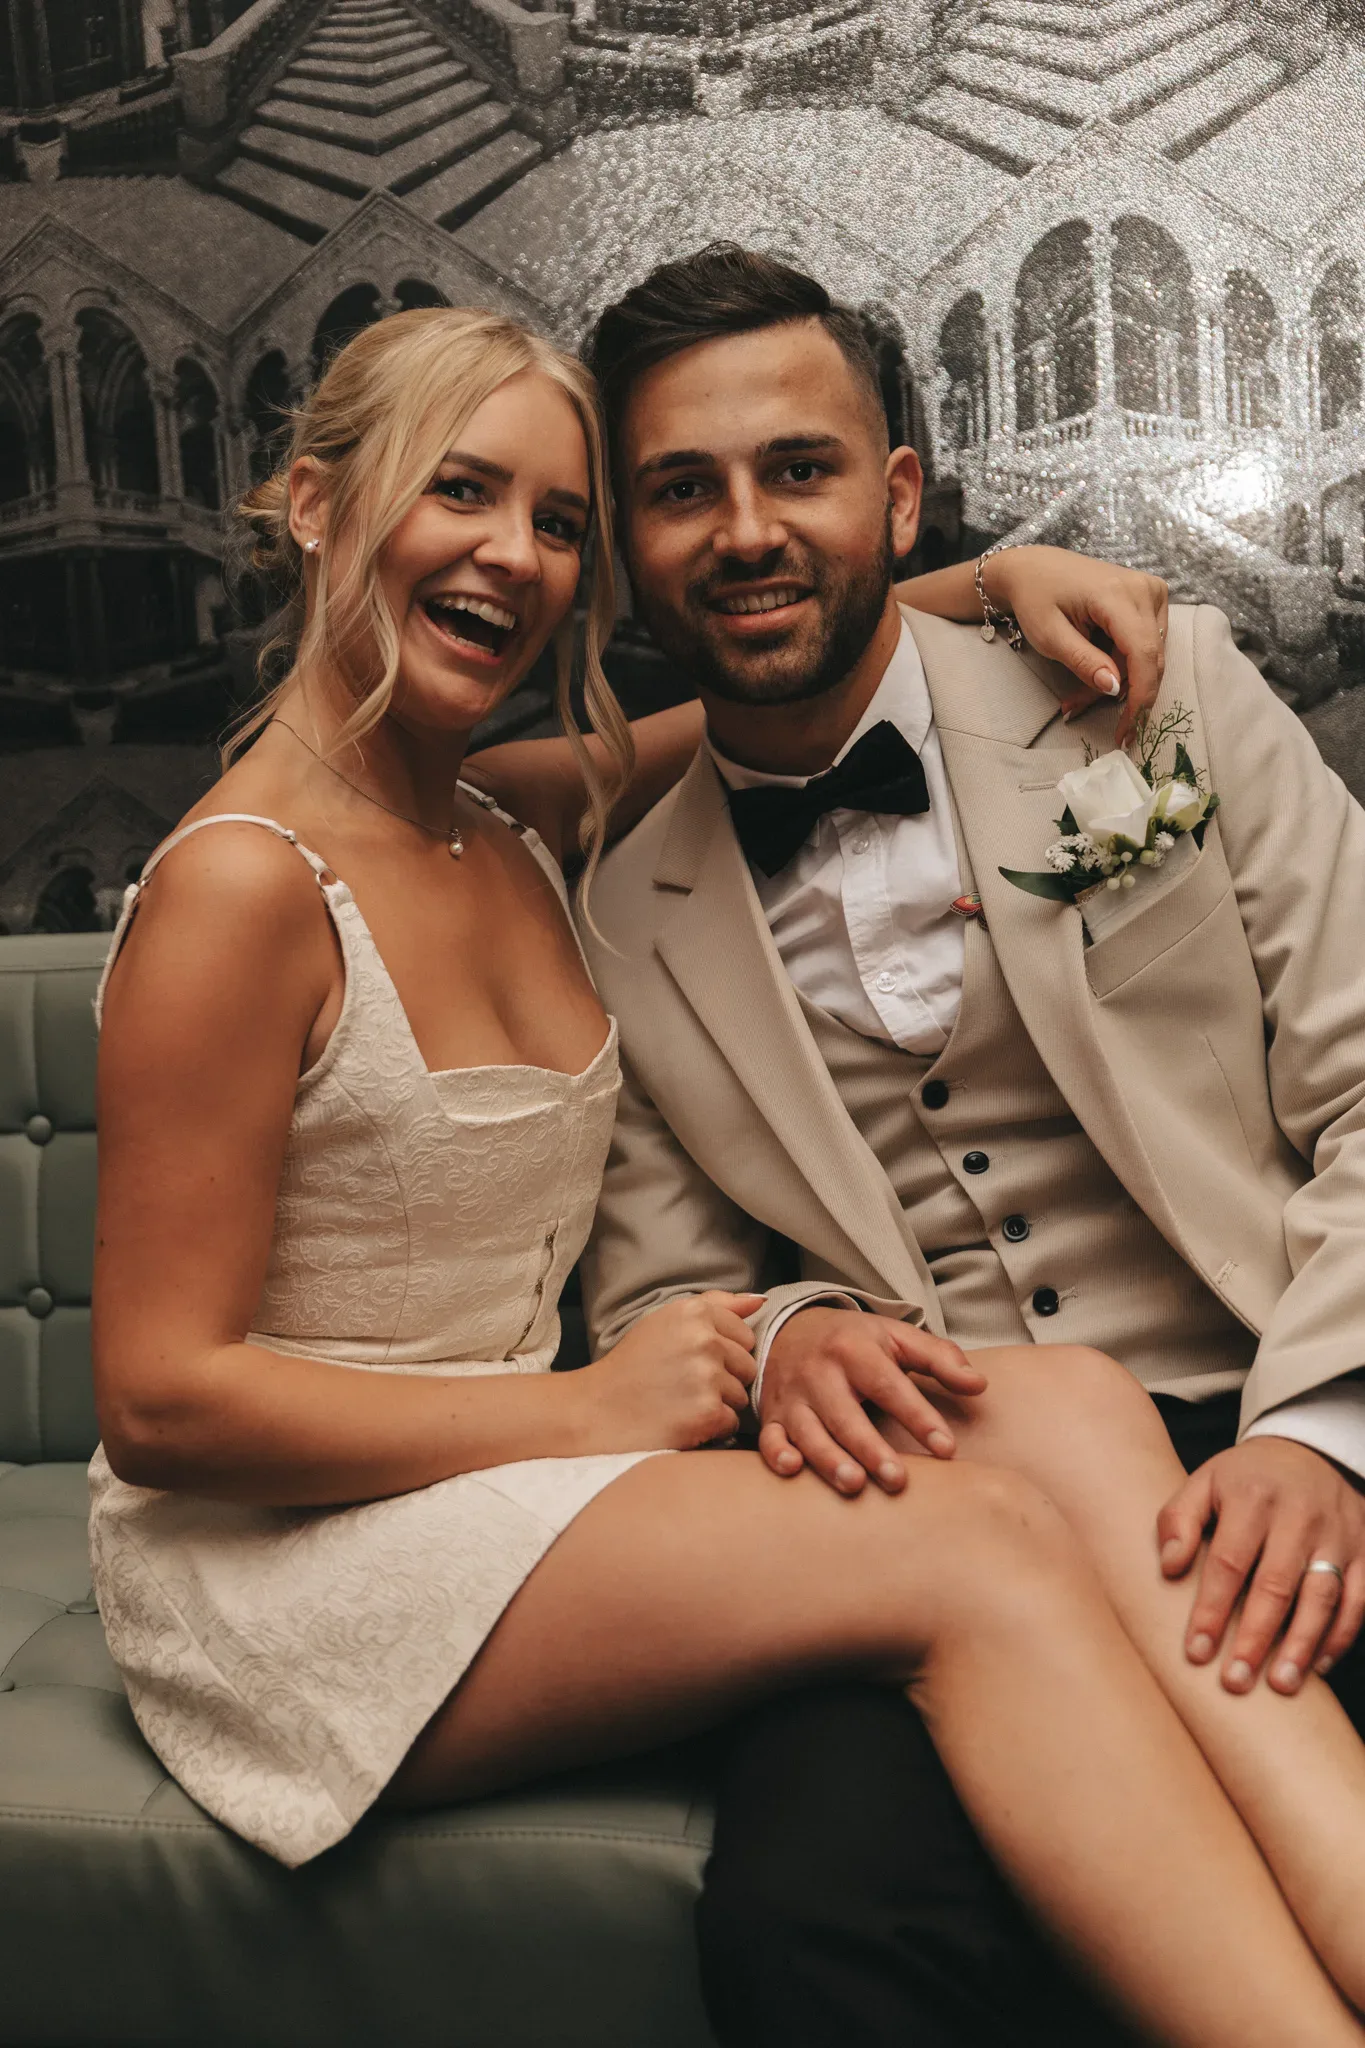 A joyful bride and groom sitting closely on a green velvet sofa. the bride, in a white lace dress, laughs beside the groom, who wears a stylish beige suit with a boutonniere. a glittering chandelier backdrop enhances the festive ambiance.